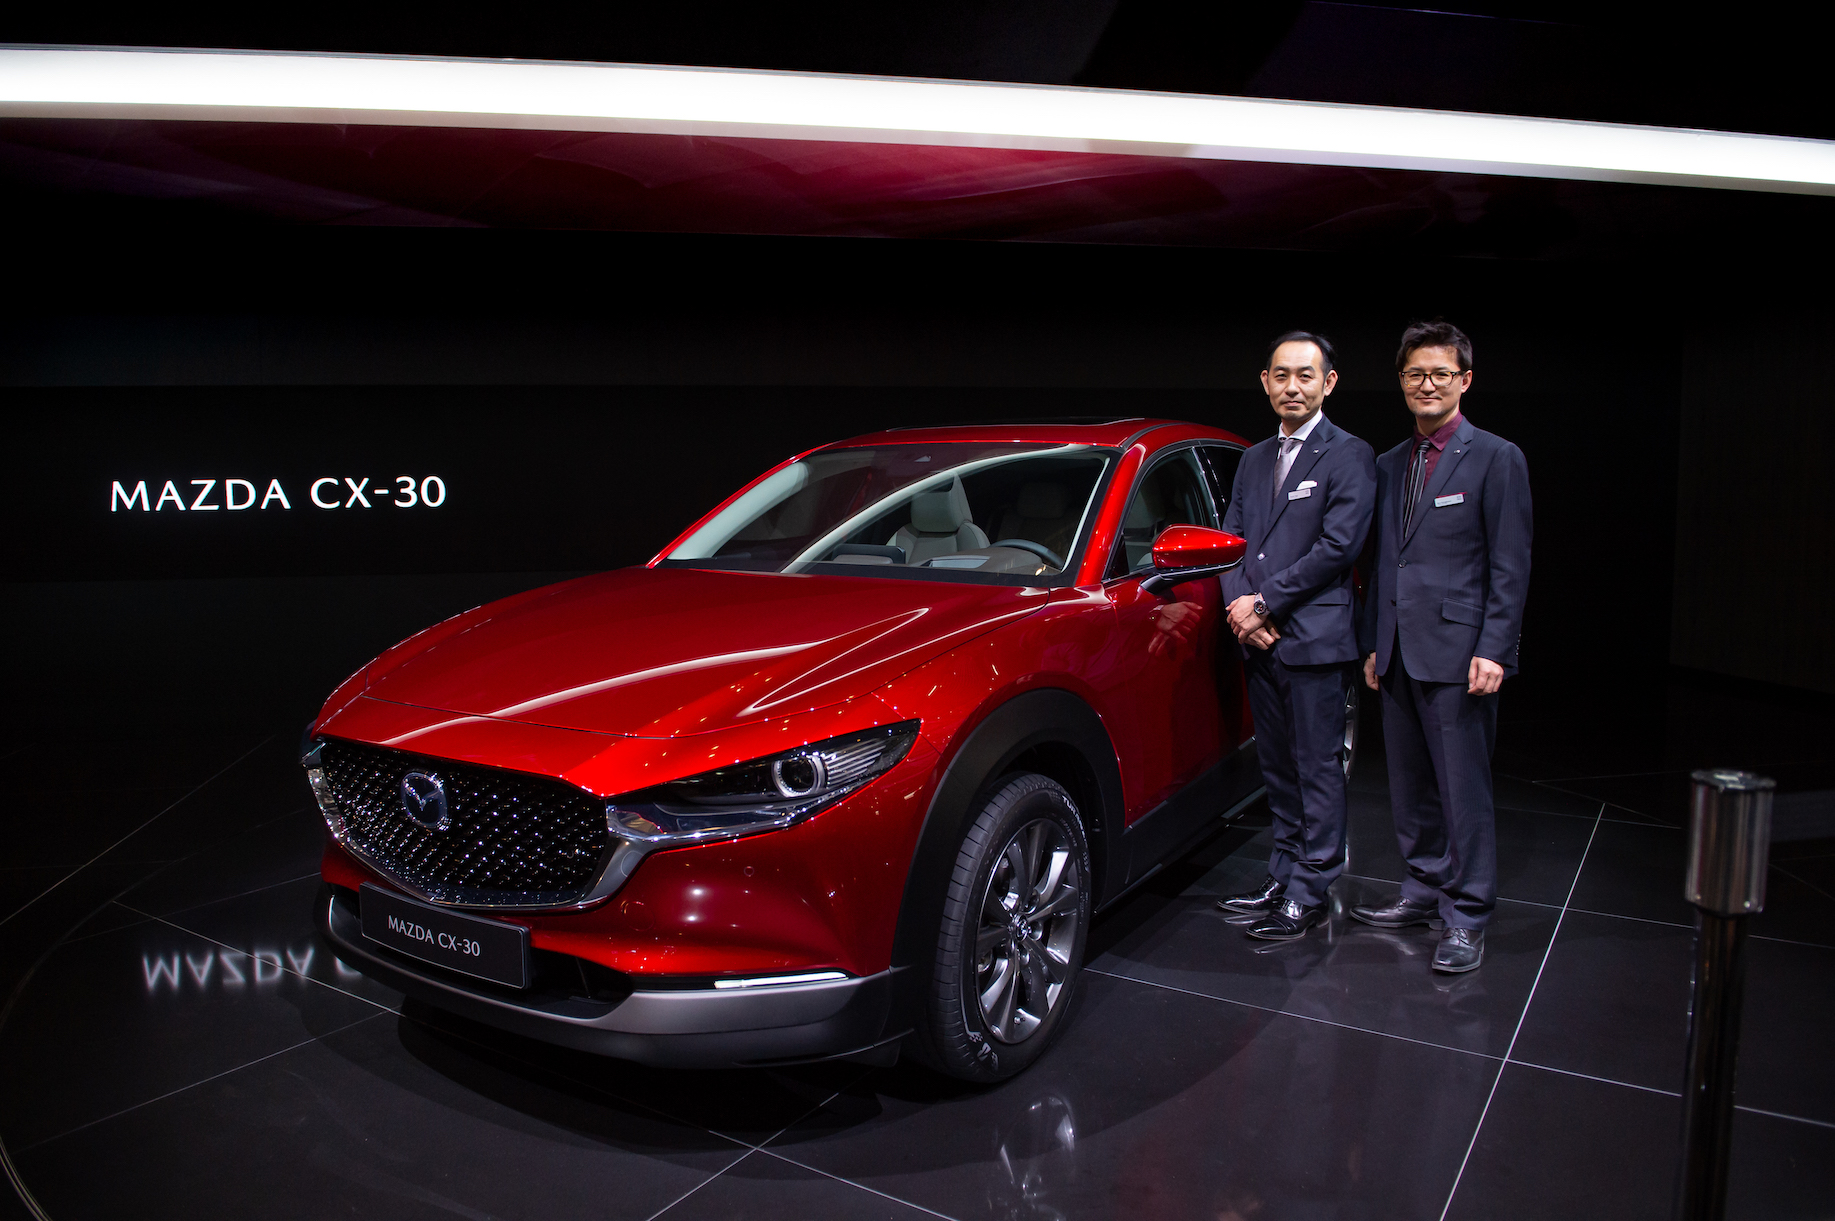 Chief Designer Ryo Yanagisawa (right) poses with Mazda CX-30 is displayed during the second press day at the 89th Geneva International Motor Show